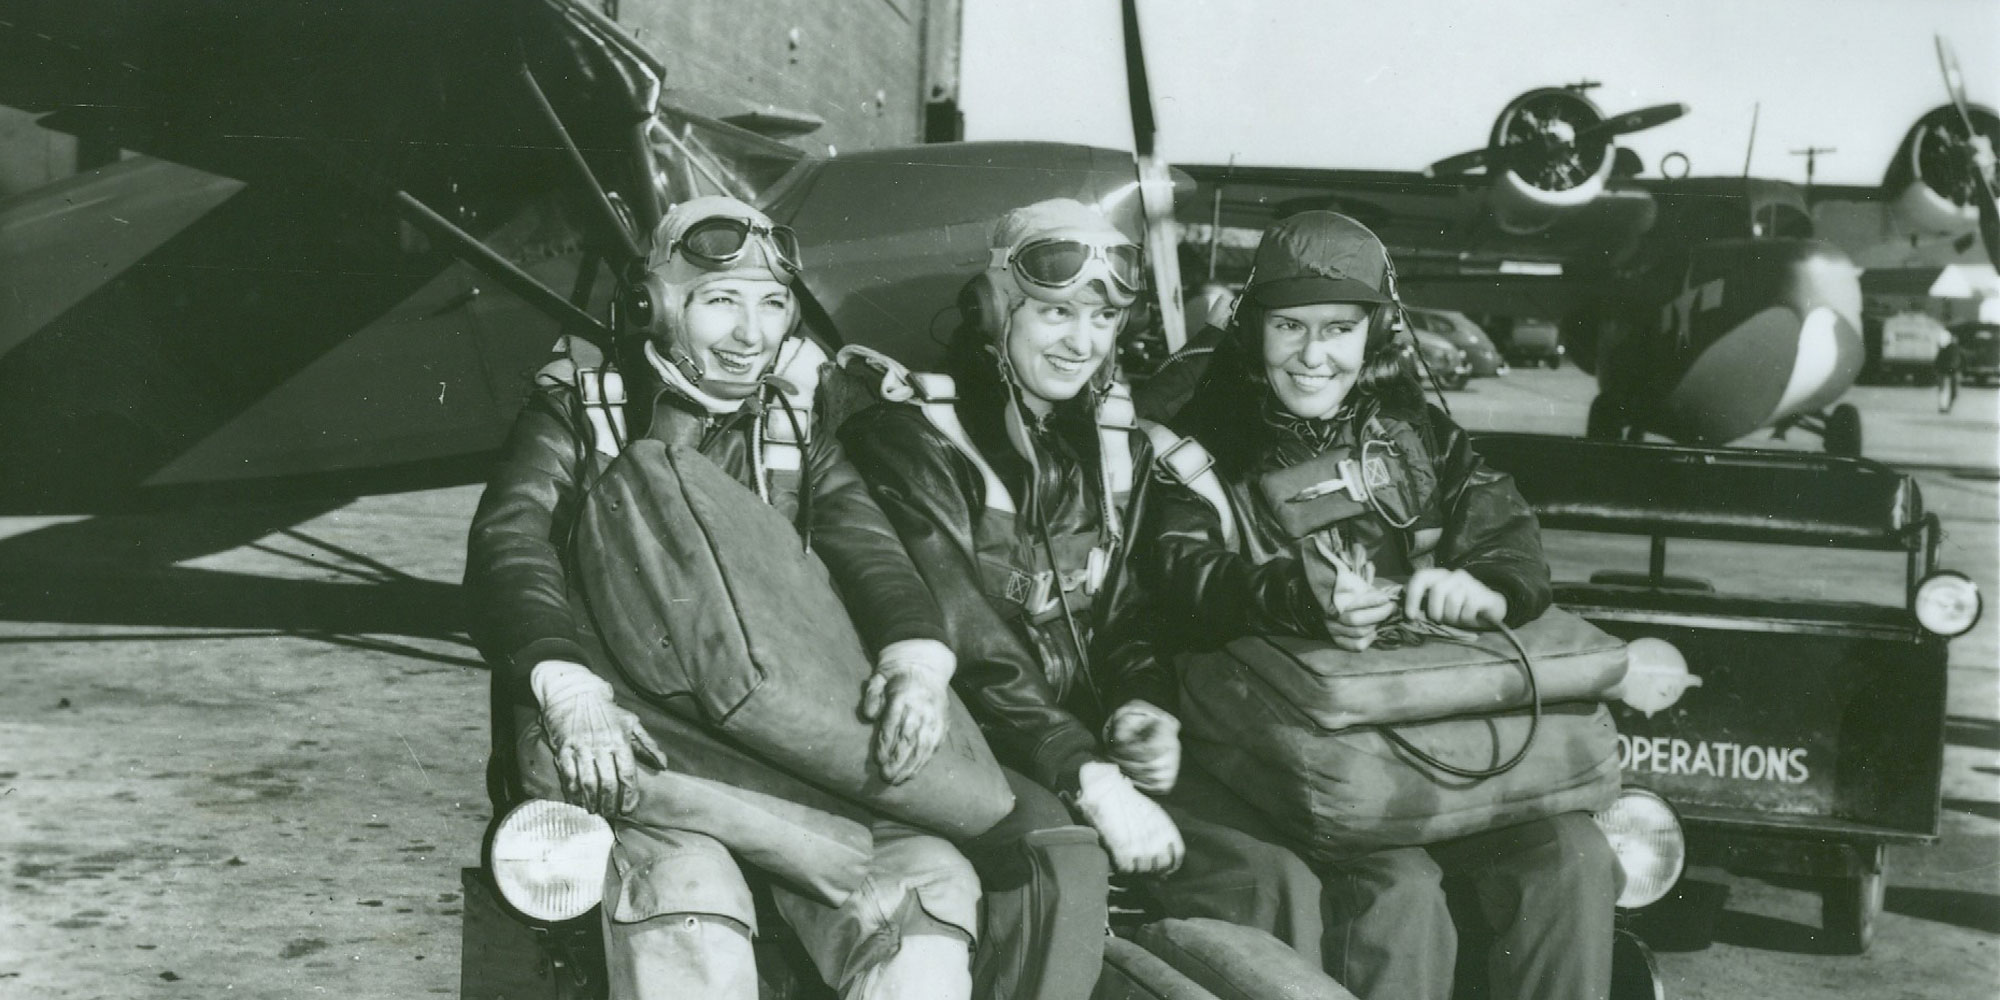 Black and white image of three women in flight suits on a runway, sitting and smiling.